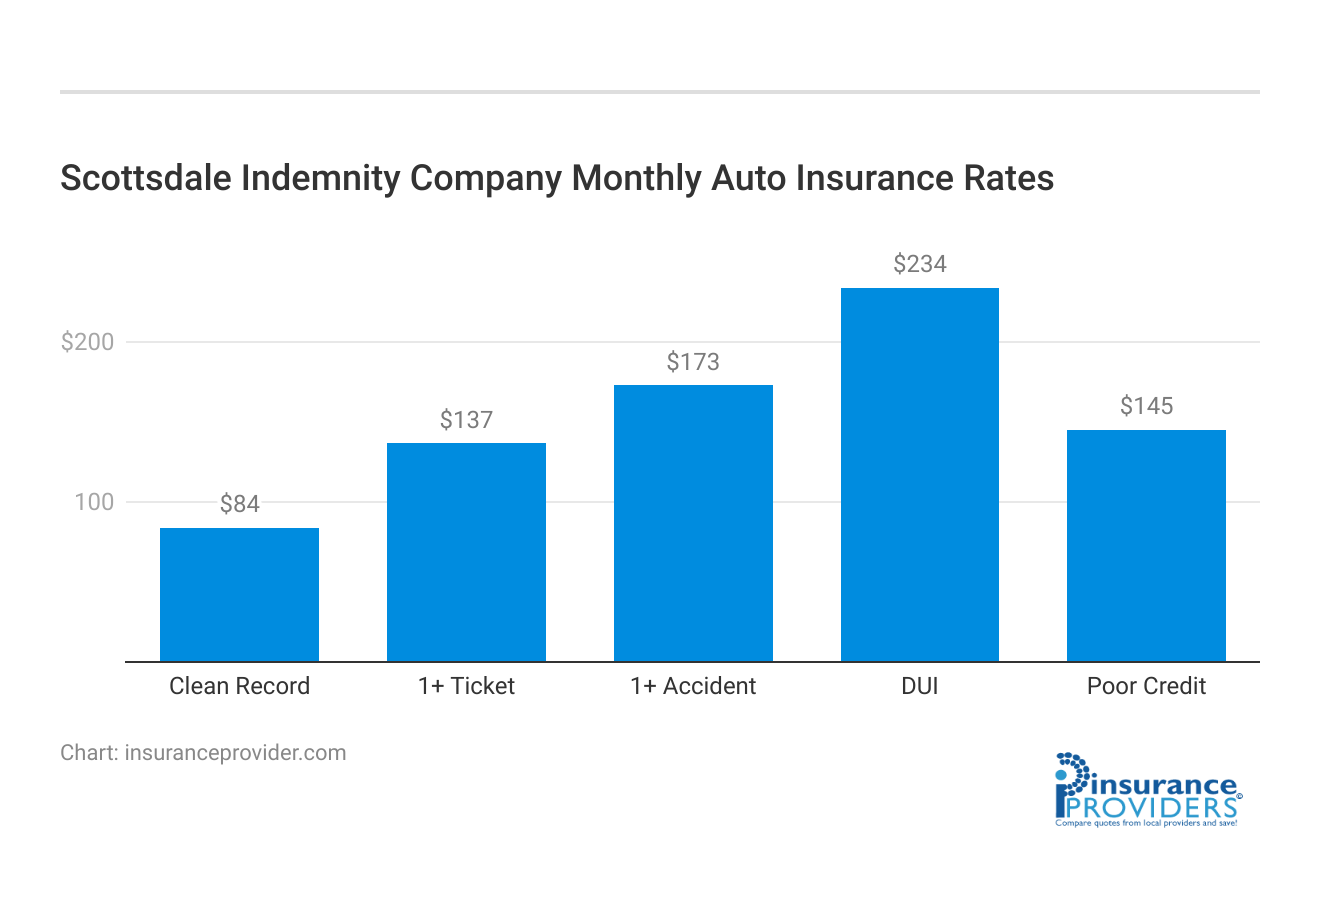 <h3>Scottsdale Indemnity Company Monthly Auto Insurance Rates</h3>